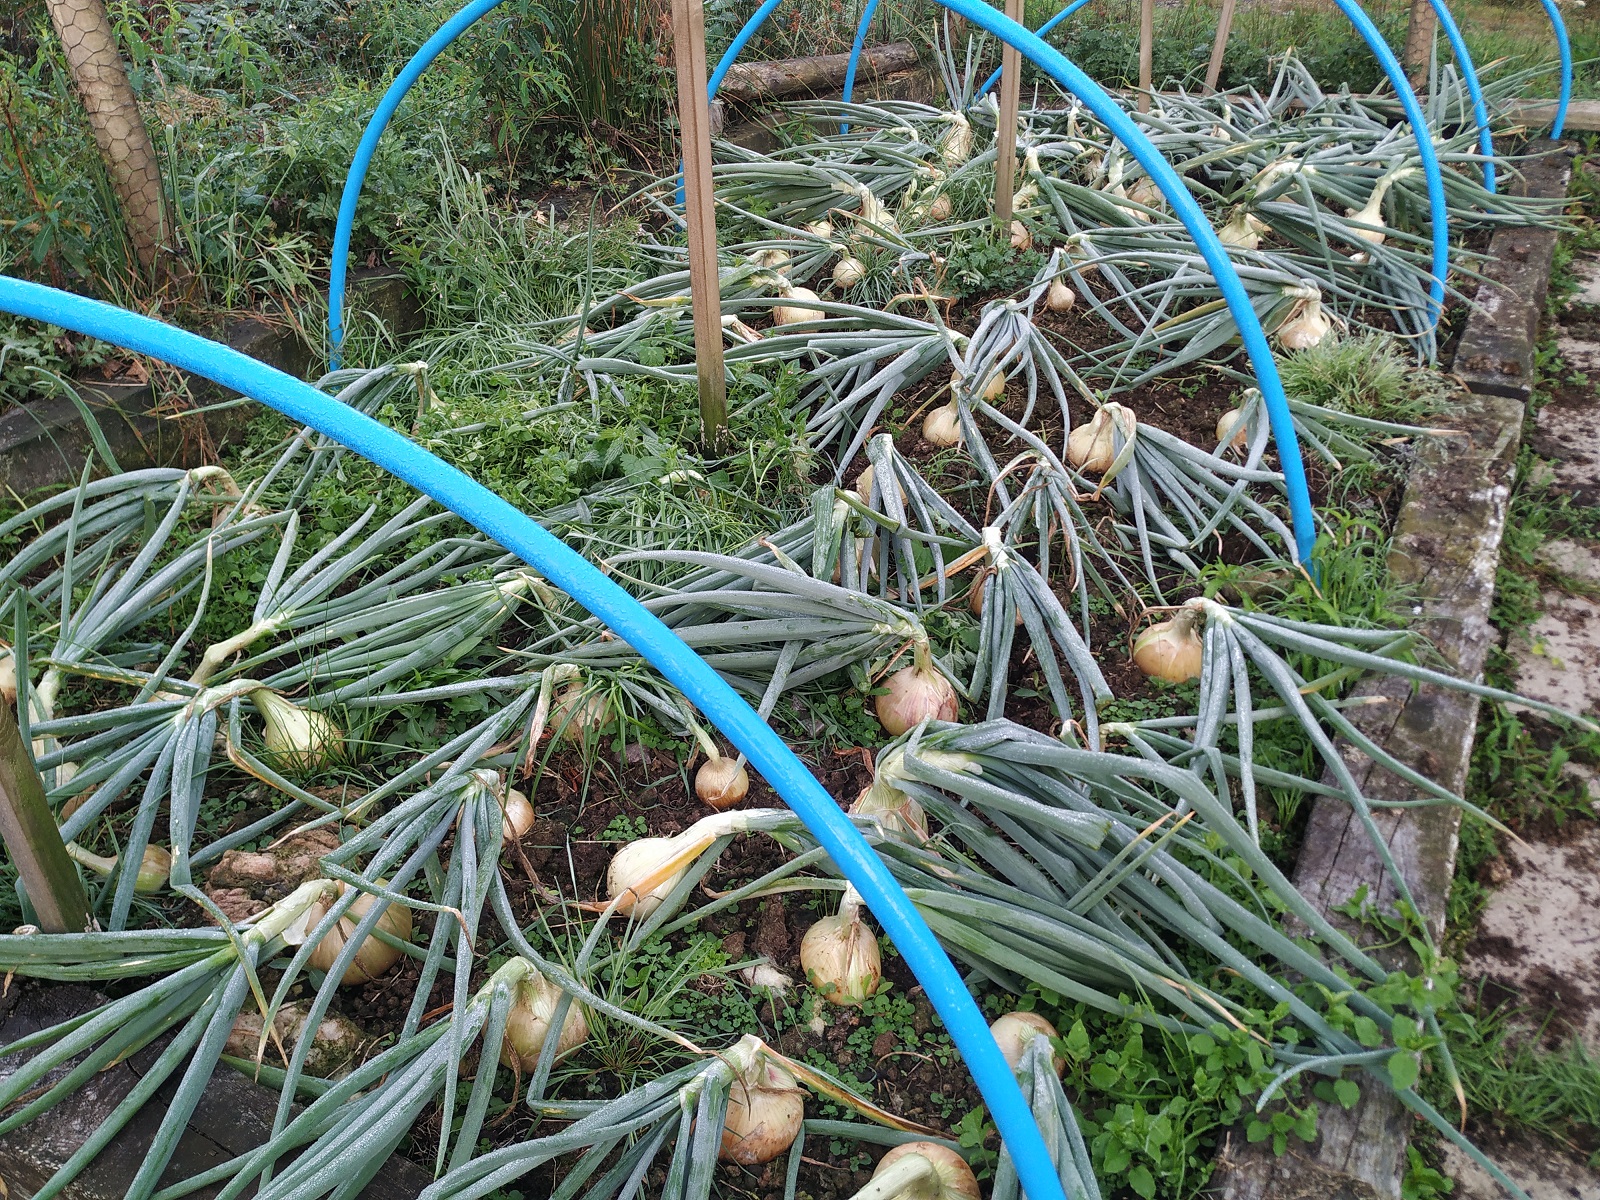 onions with leaves bent